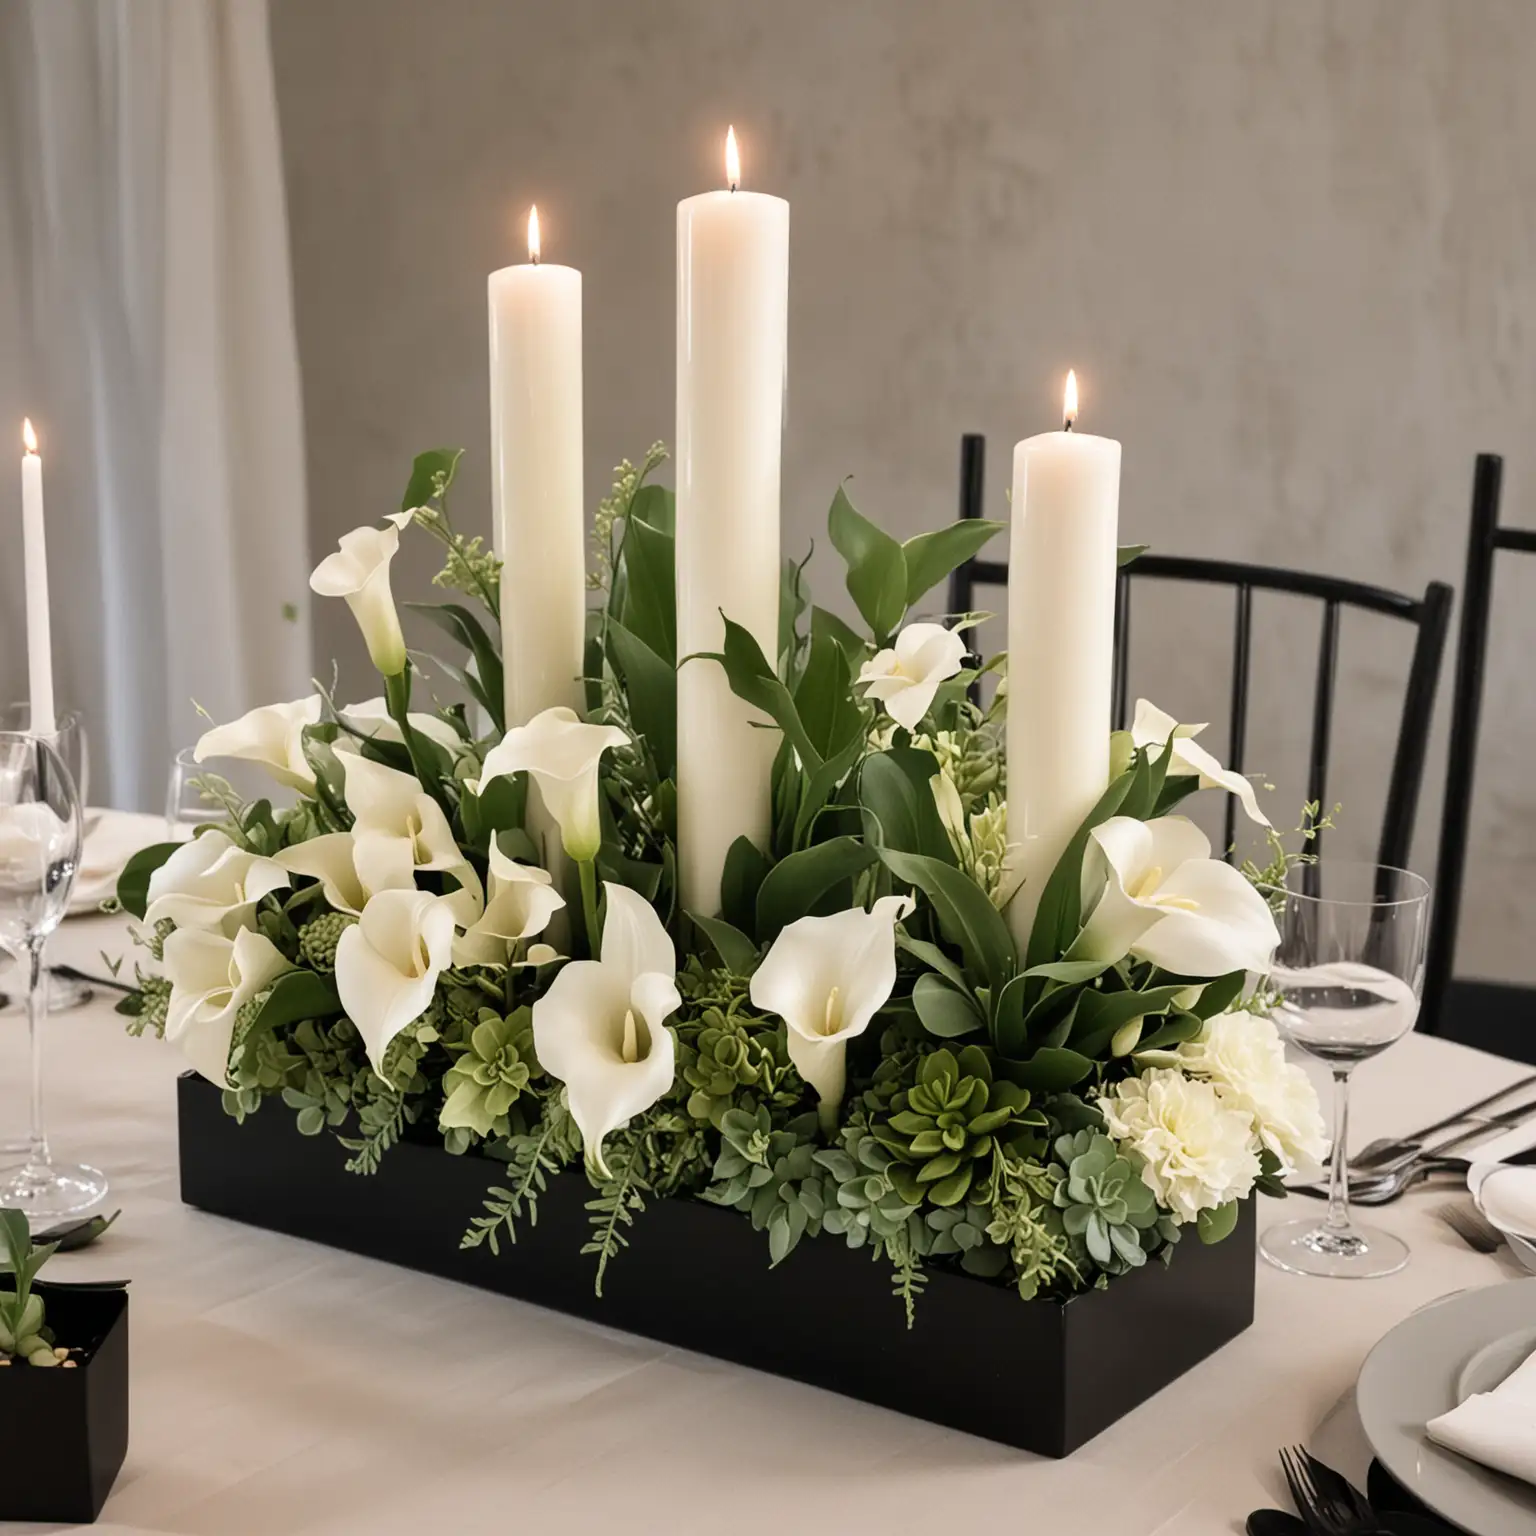 an modern wedding centerpiece with a sleek rectangular black metal vase with white pillar candles balanced beautifully with white calla lilies and succulents